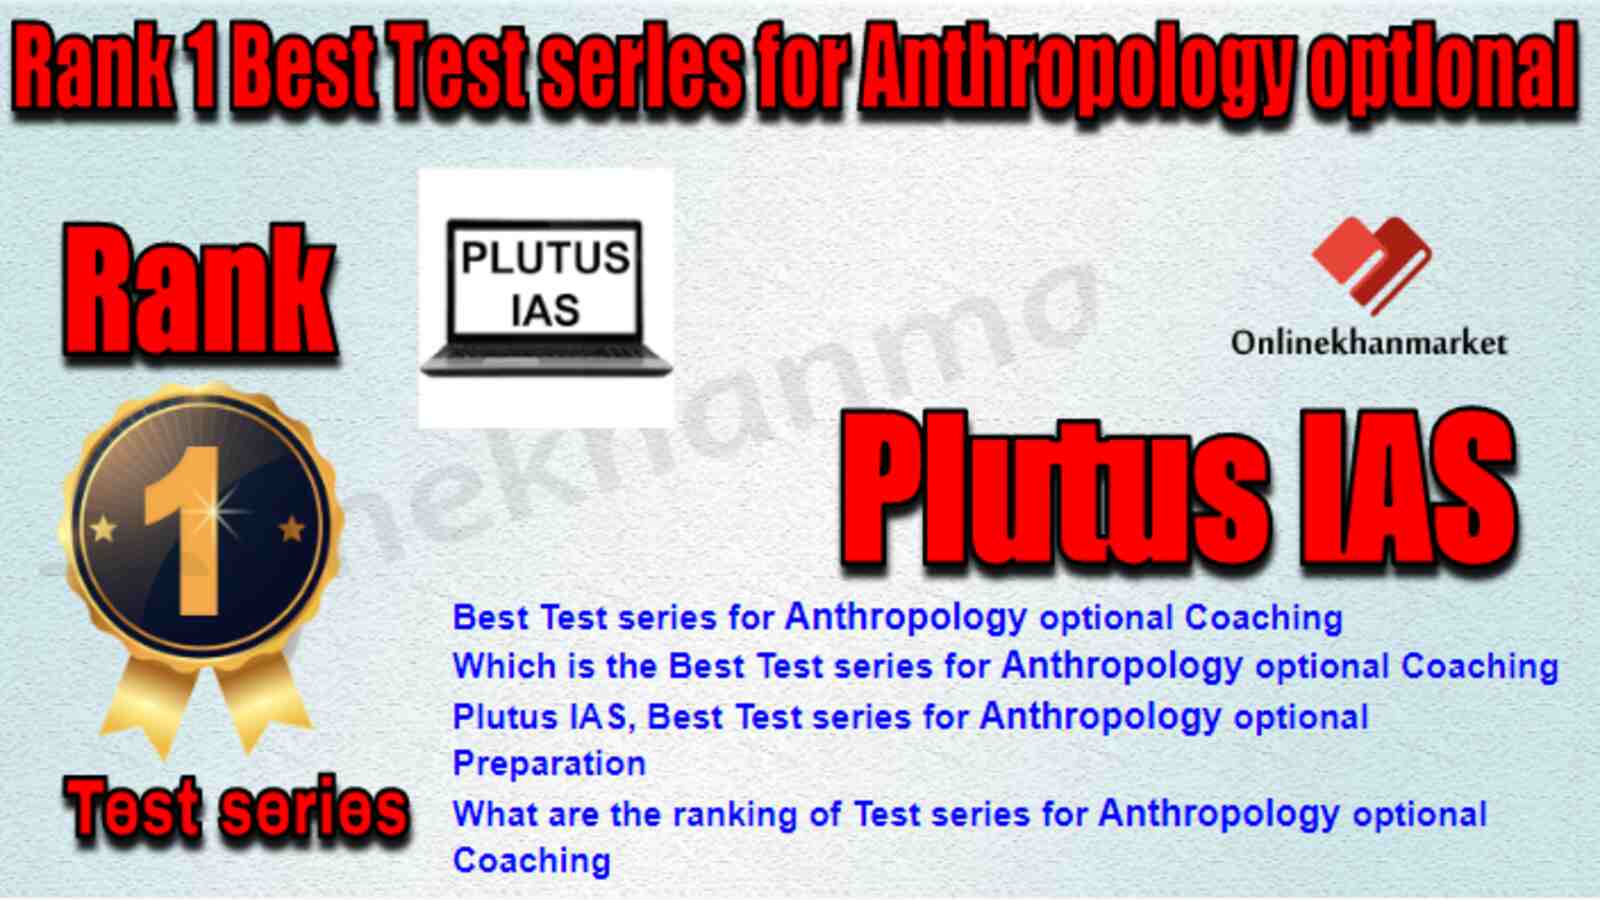 Rank 1 Best Test series for Anthropology optional